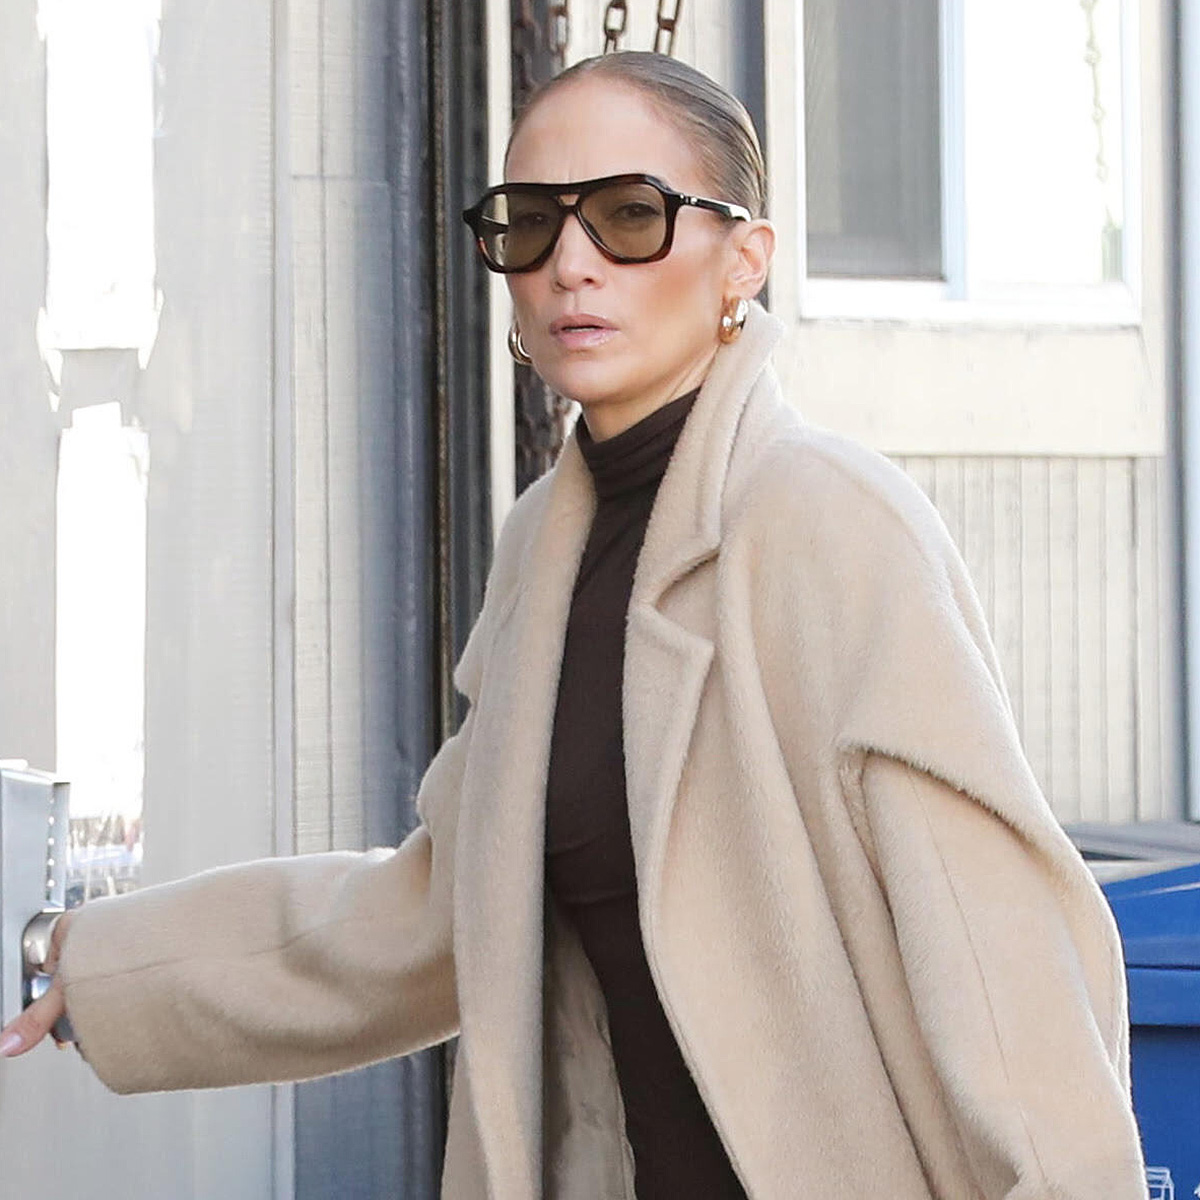 Jennifer Lopez’s $75 Sunglasses Are Wildly On-Trend Right Now